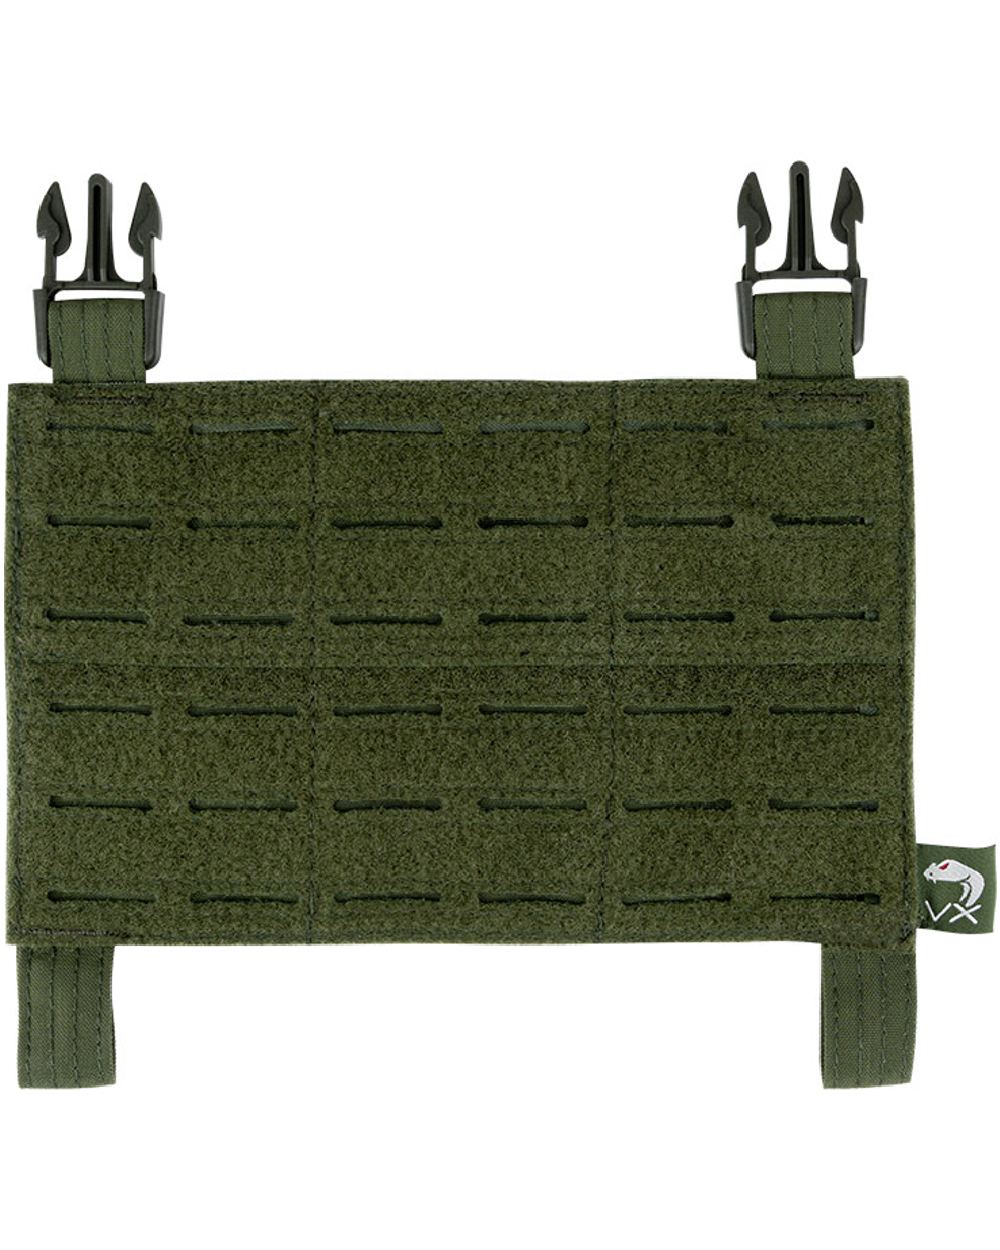 Viper VX Buckle Up Panel in Green 